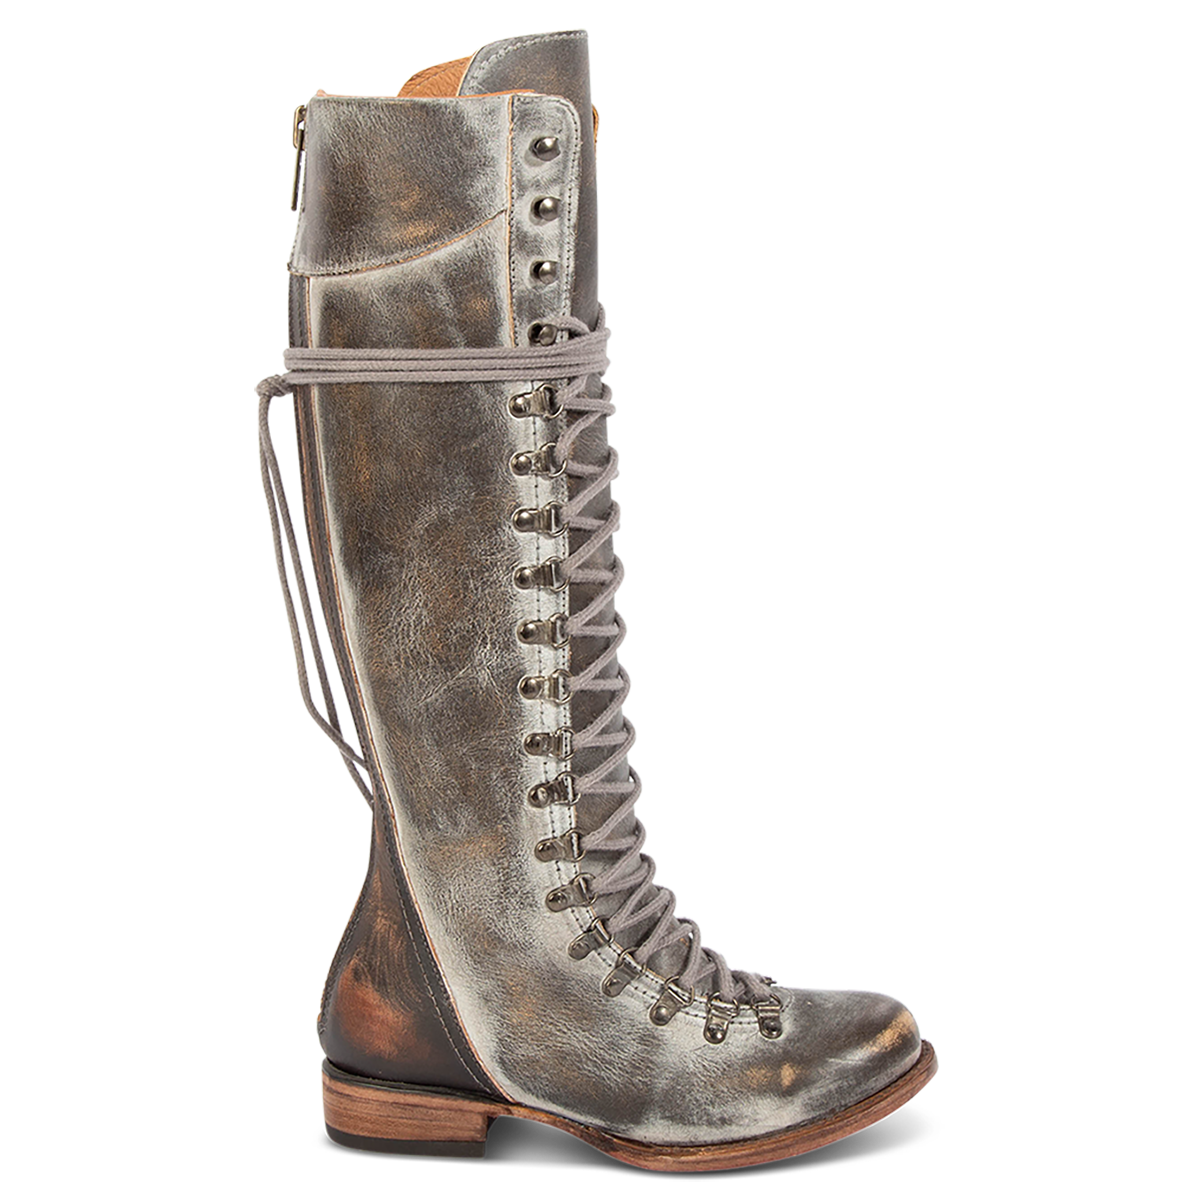 FREEBIRD women's Raphael ice lace up front shaft and eyelet lacing featuring a full back zip closure